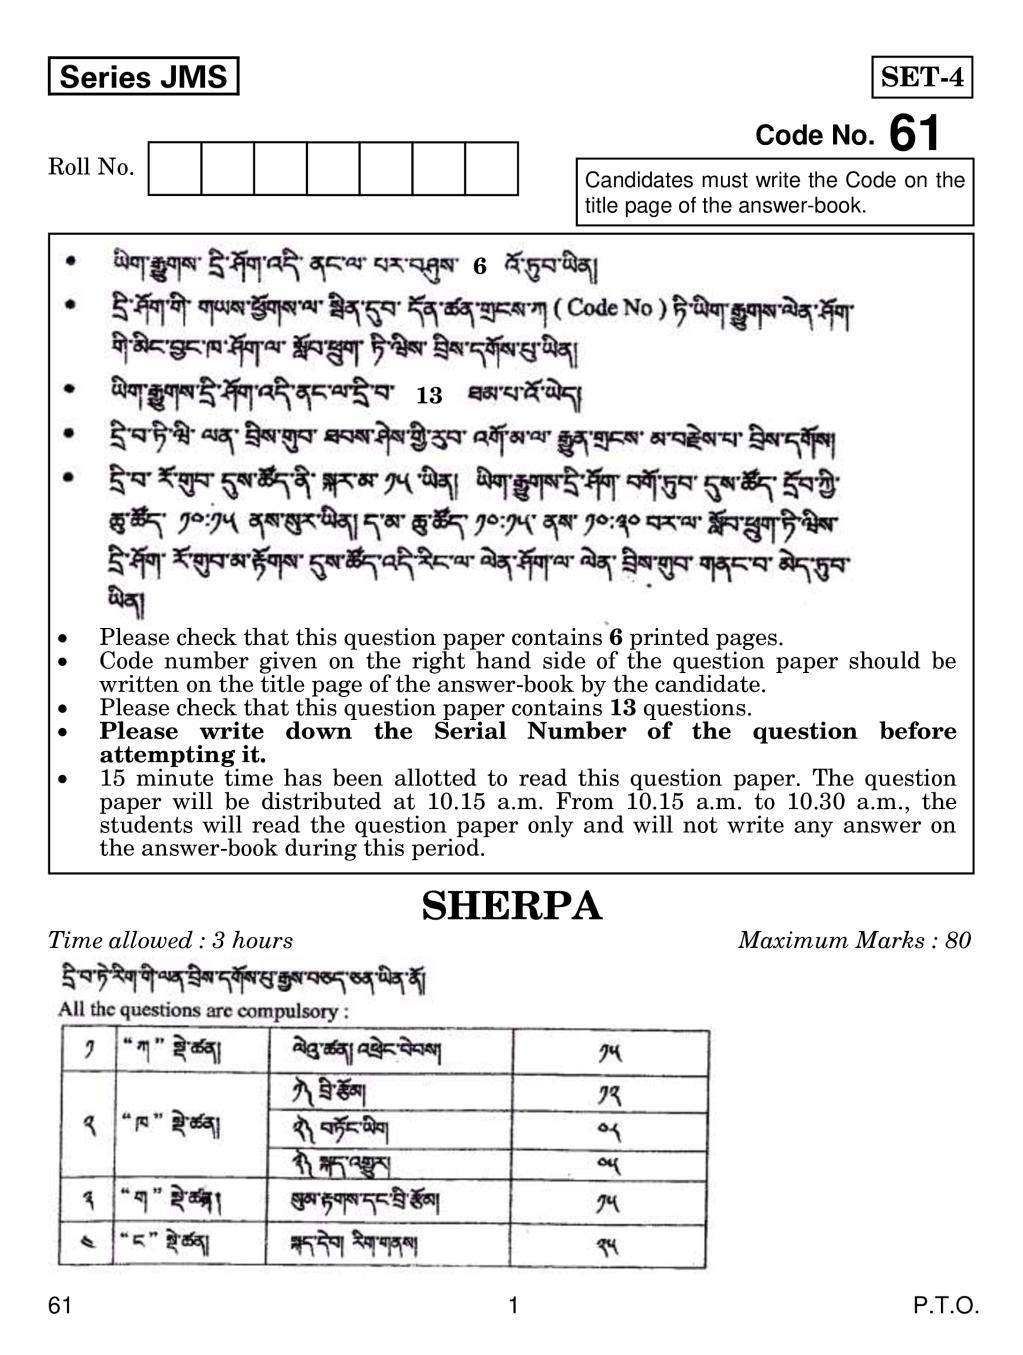 CBSE Class 10 Sherpa Question Paper 2019 - Page 1